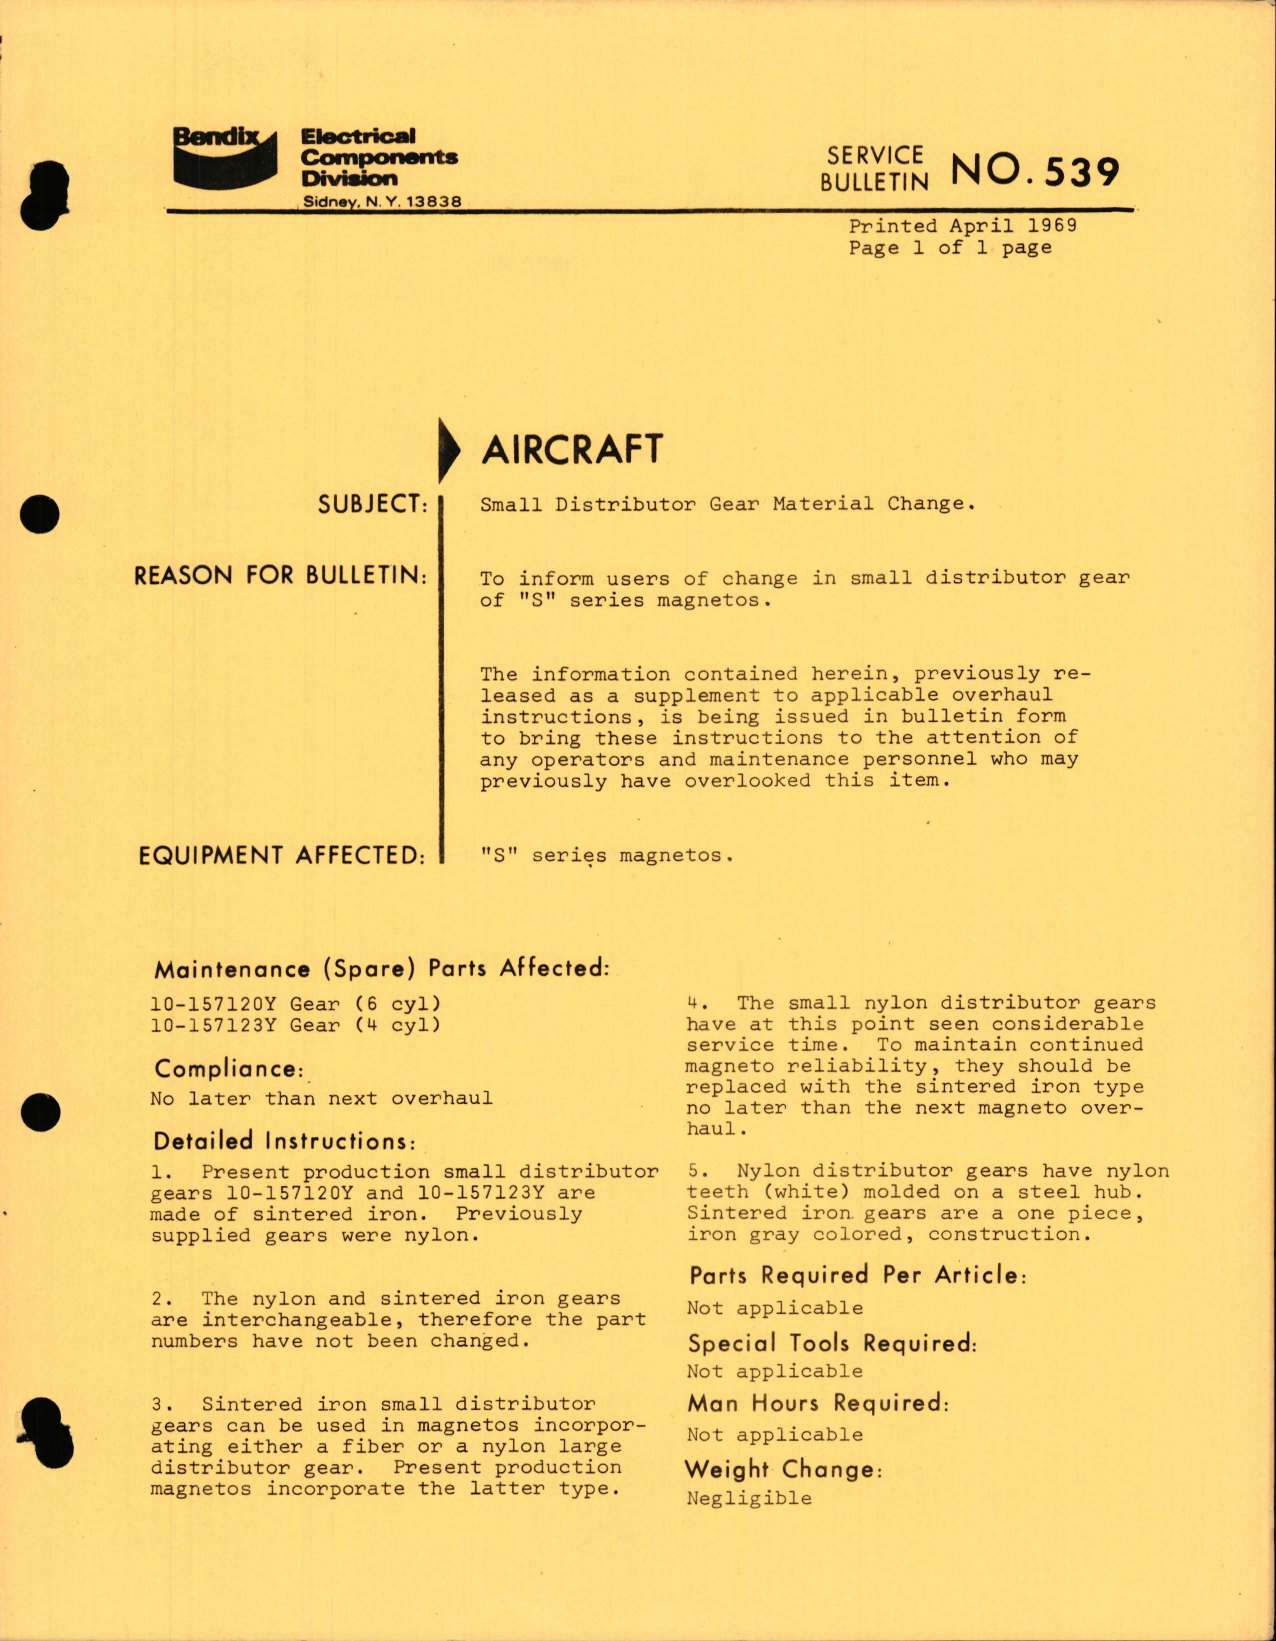 Sample page 1 from AirCorps Library document: Small Distributor Gear Material Change